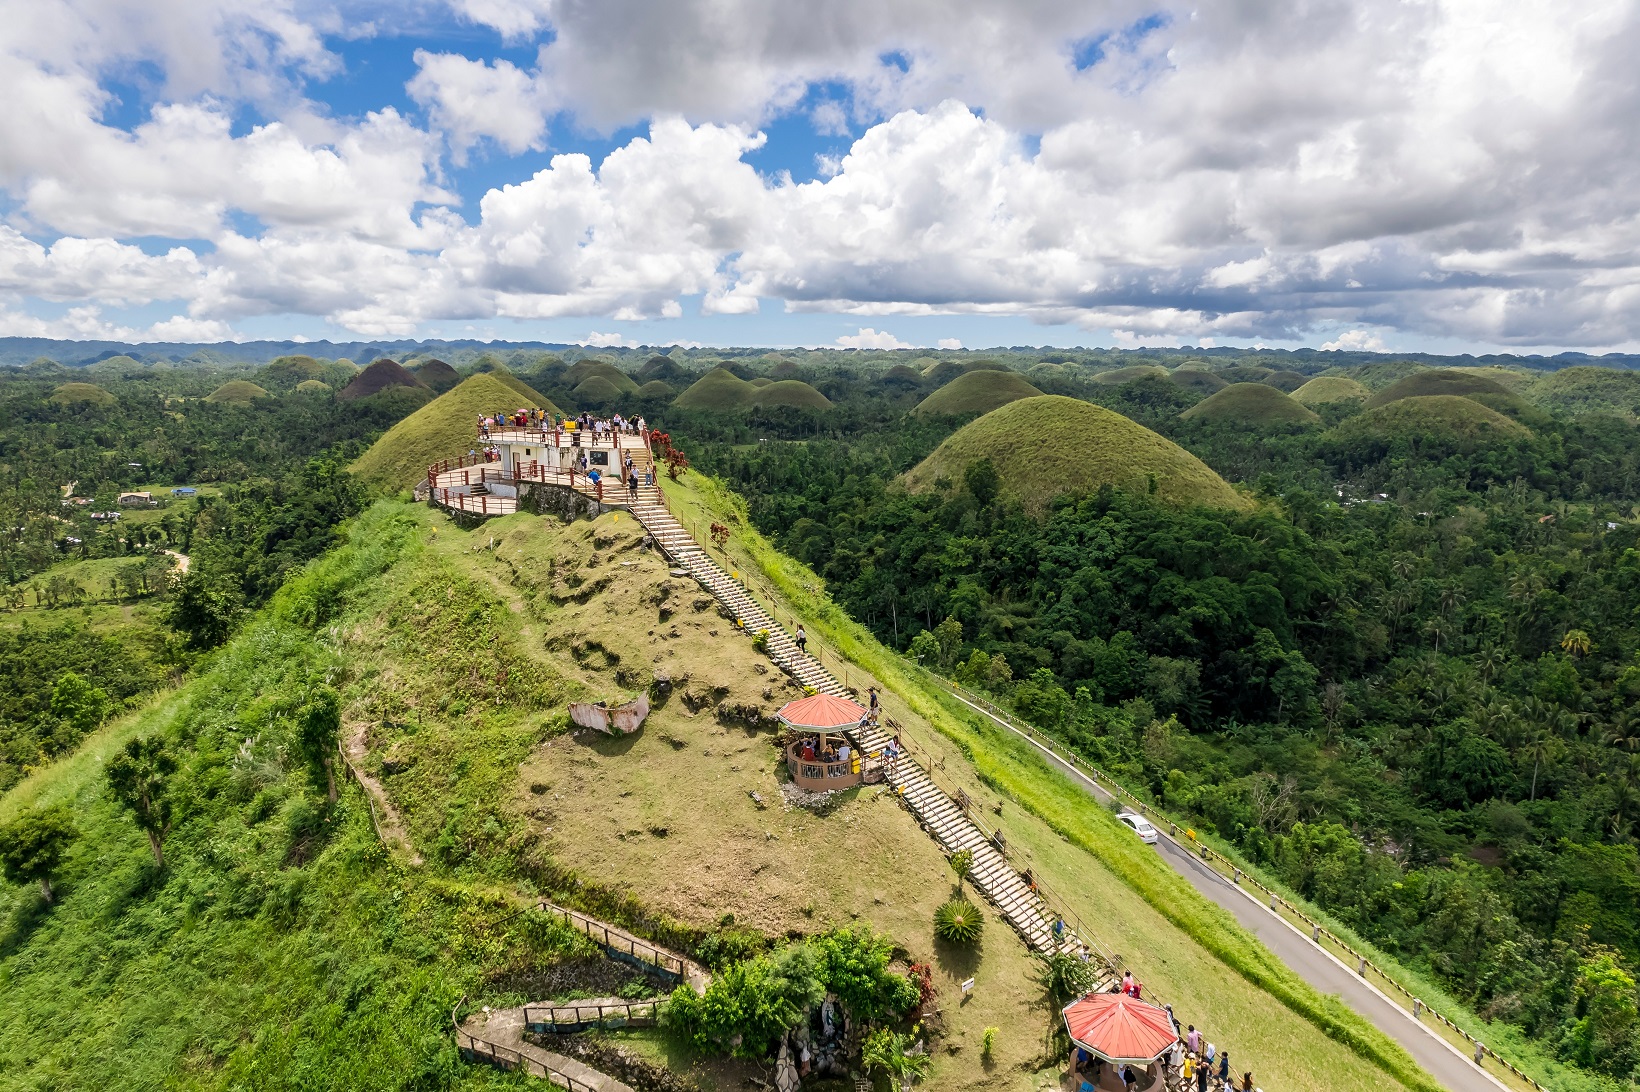 <p>No one knows why, but the DENR has granted permits to mining companies that seek to profit off the natural resources within the Chocolate Hills. </p>  <p>The problem has become so pronounced that the Bohol provincial is hoping to take over the legal jurisdiction of the Chocolate Hills, to protect the land masses, but this process is costly and hasn’t made much headway.</p>